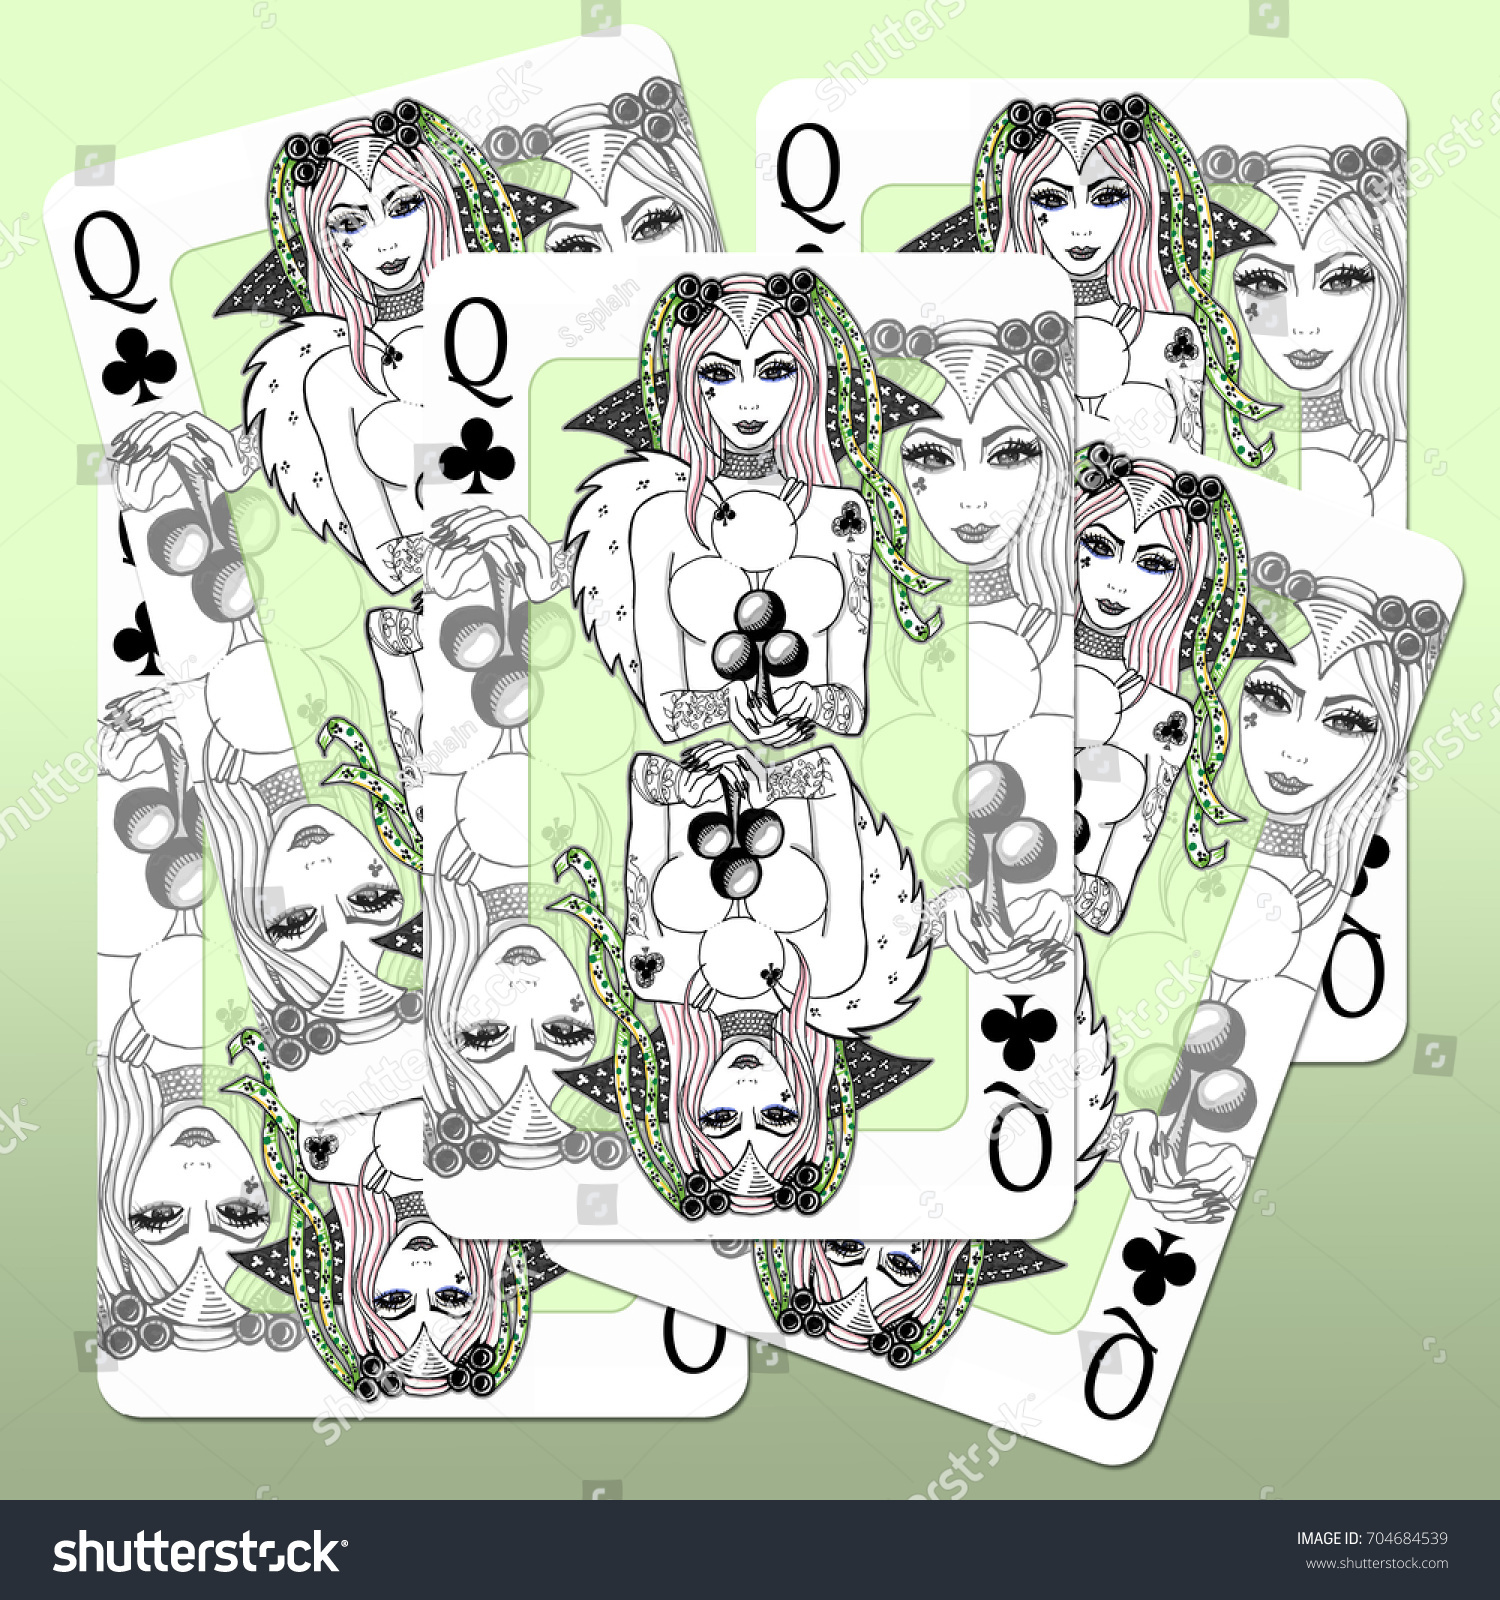 Queens Clubs Playing Card Design Hand Stock Illustration 704684539